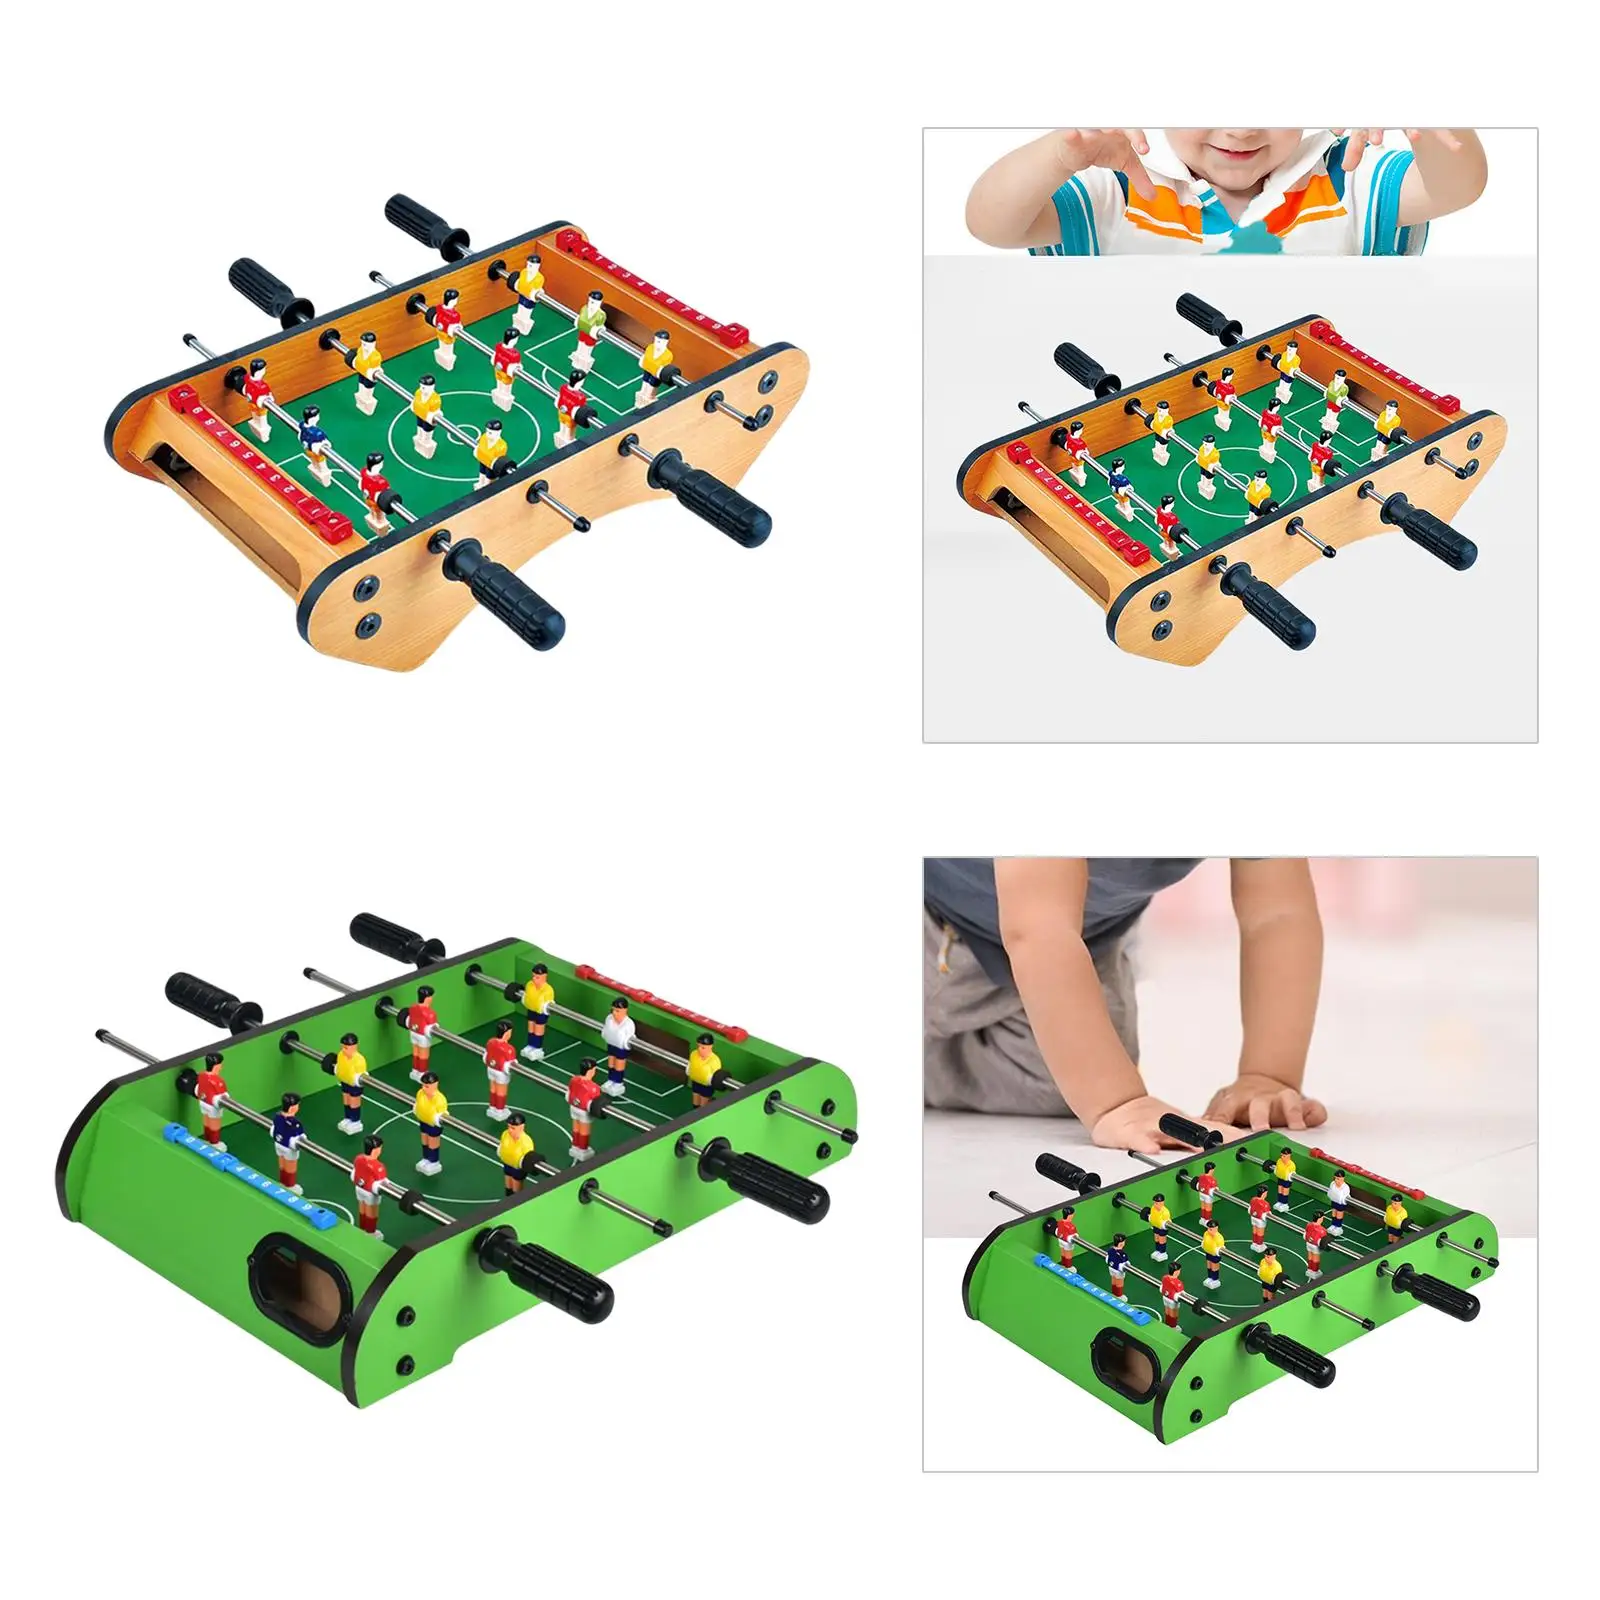 Wooden Tabletop Football Soccer Pinball Games Hands with Ball Interactive Toy Educational Toy Desktop Game for Sports Family